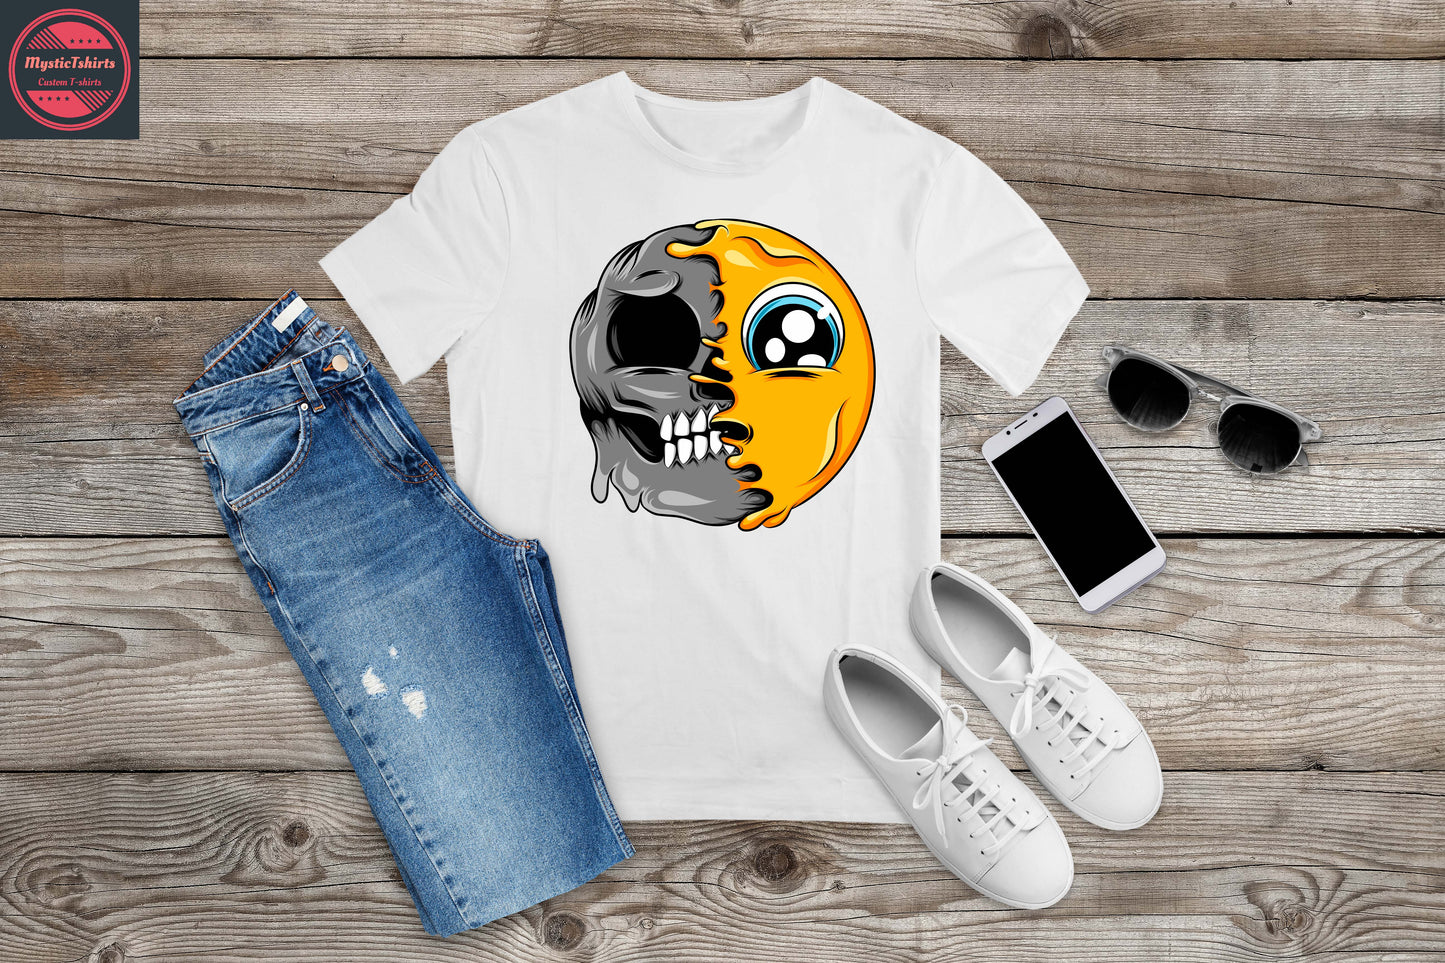 085. CRAZY FACE, Personalized T-Shirt, Custom Text, Make Your Own Shirt, Custom Tee